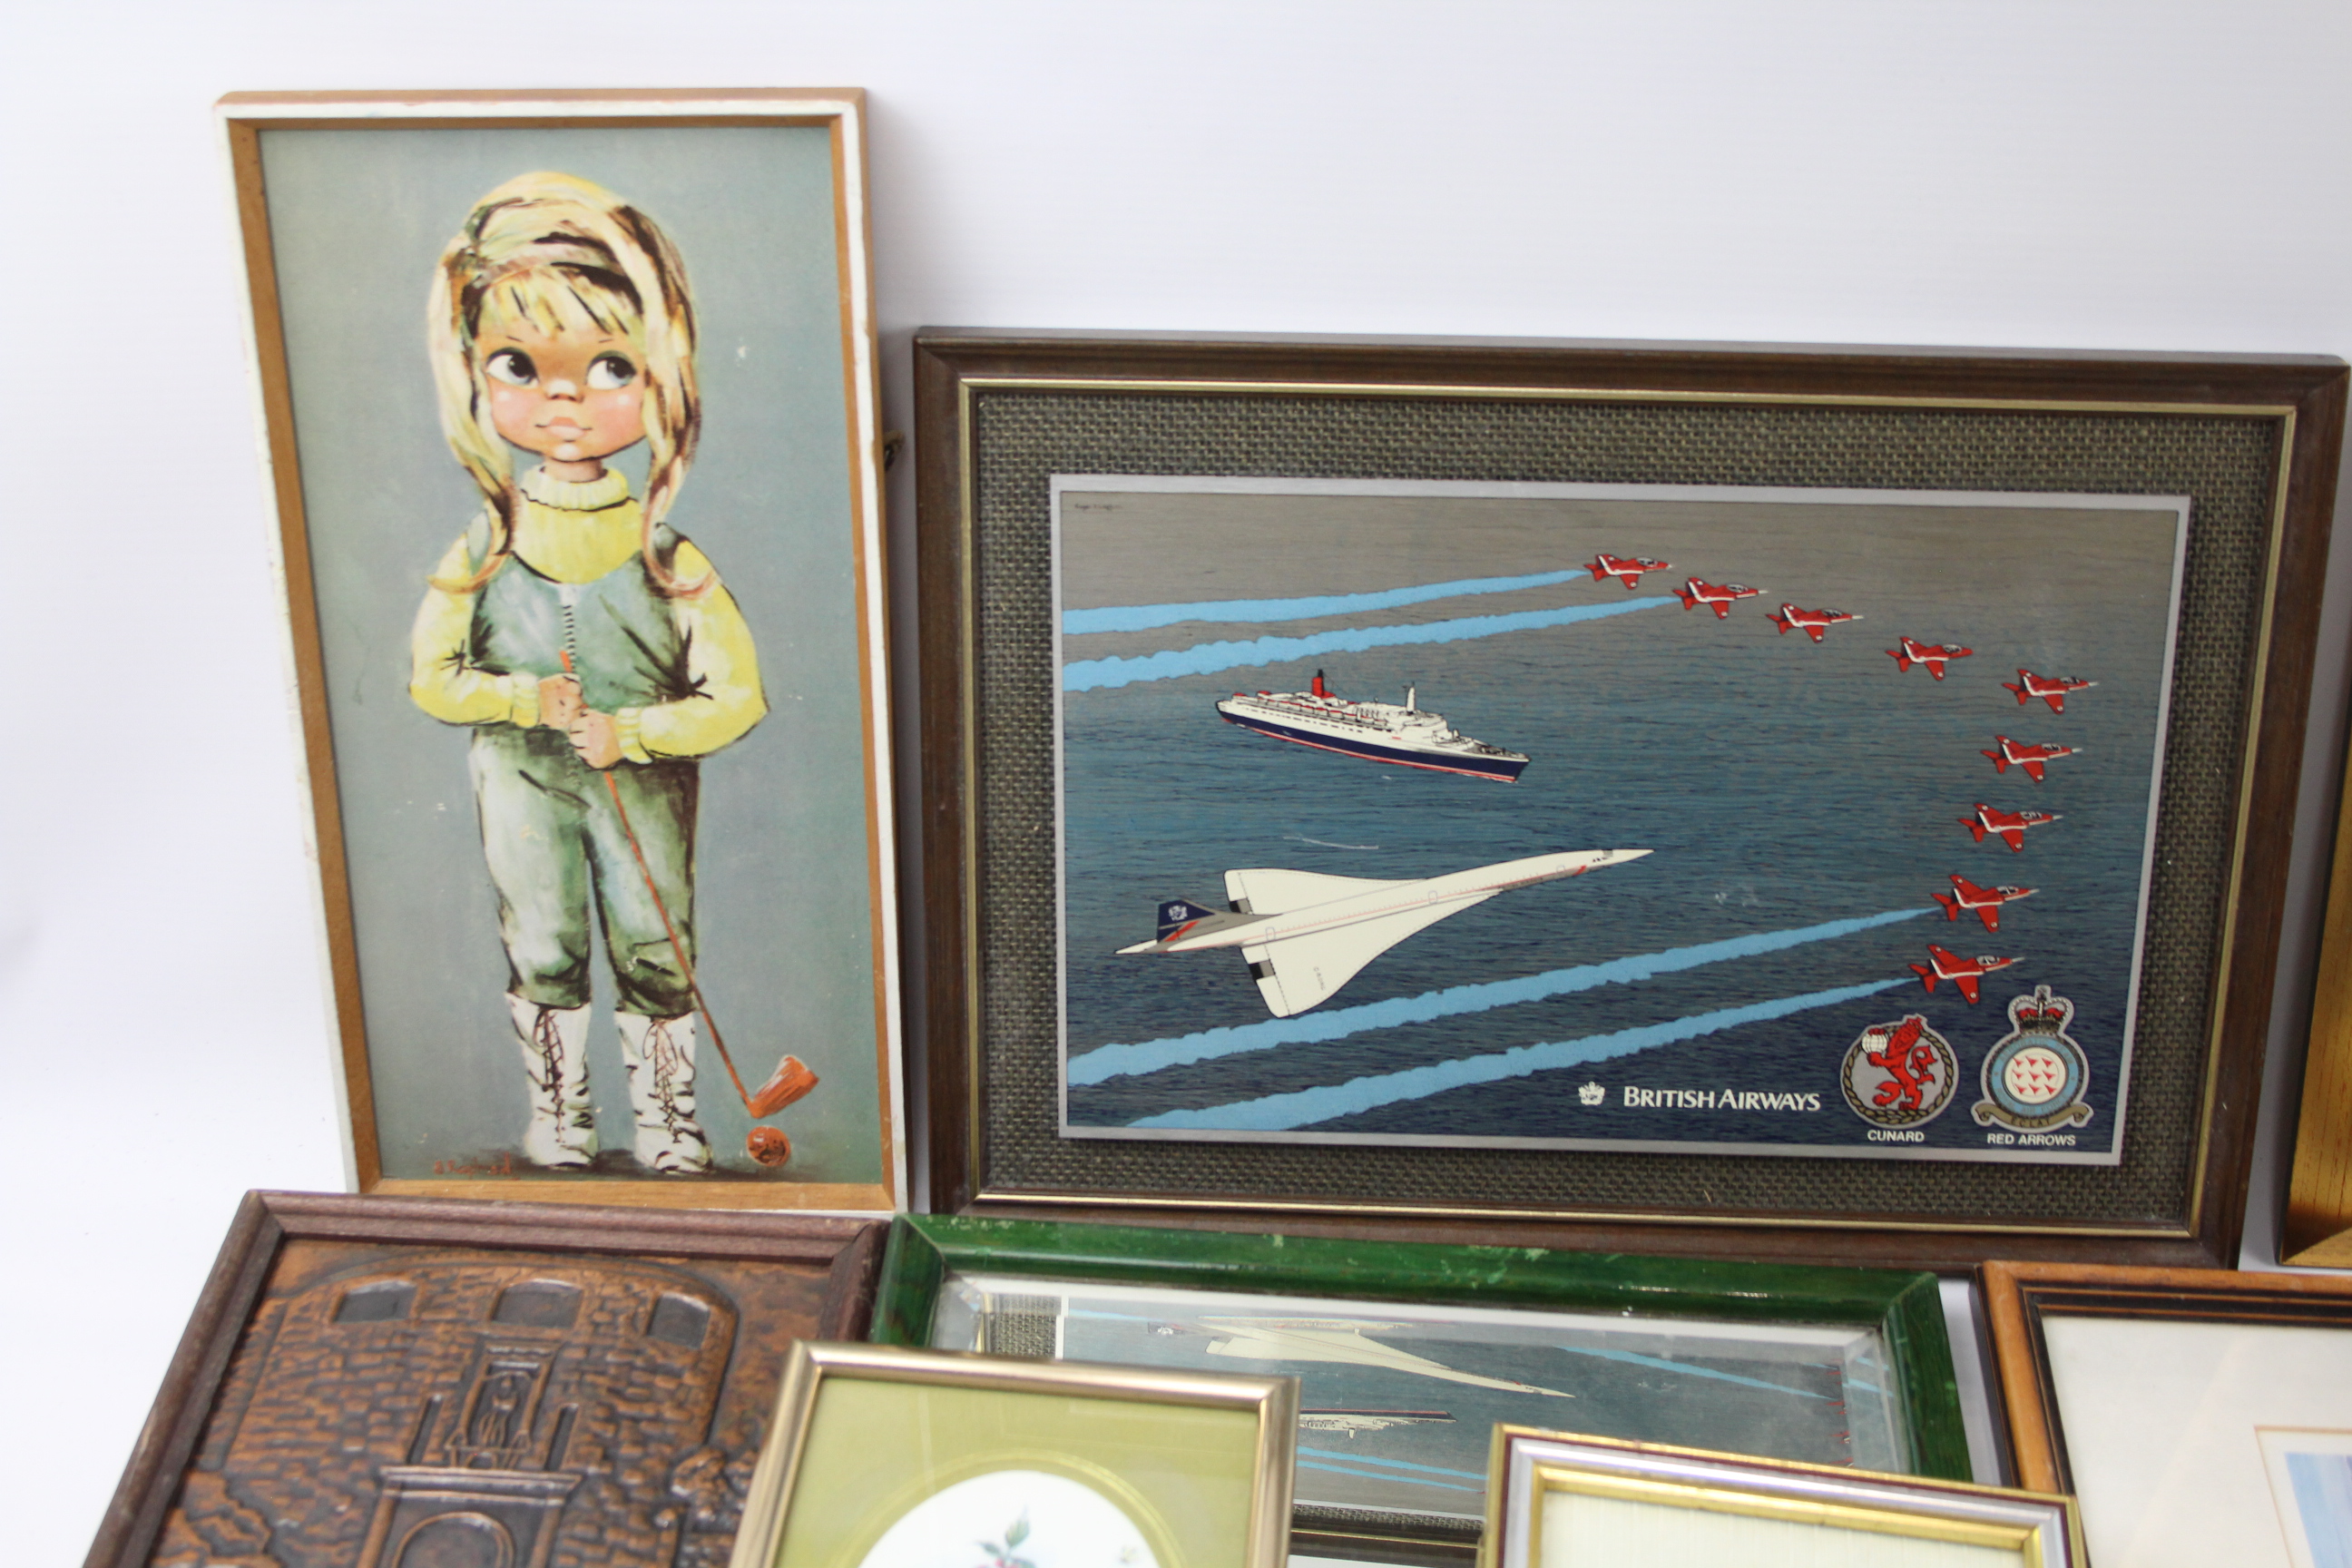 Picture Frames / Art / Prints Job Lot Inc Teddy Playing Cricket - Red Arrows Etc 561311 - Image 2 of 7